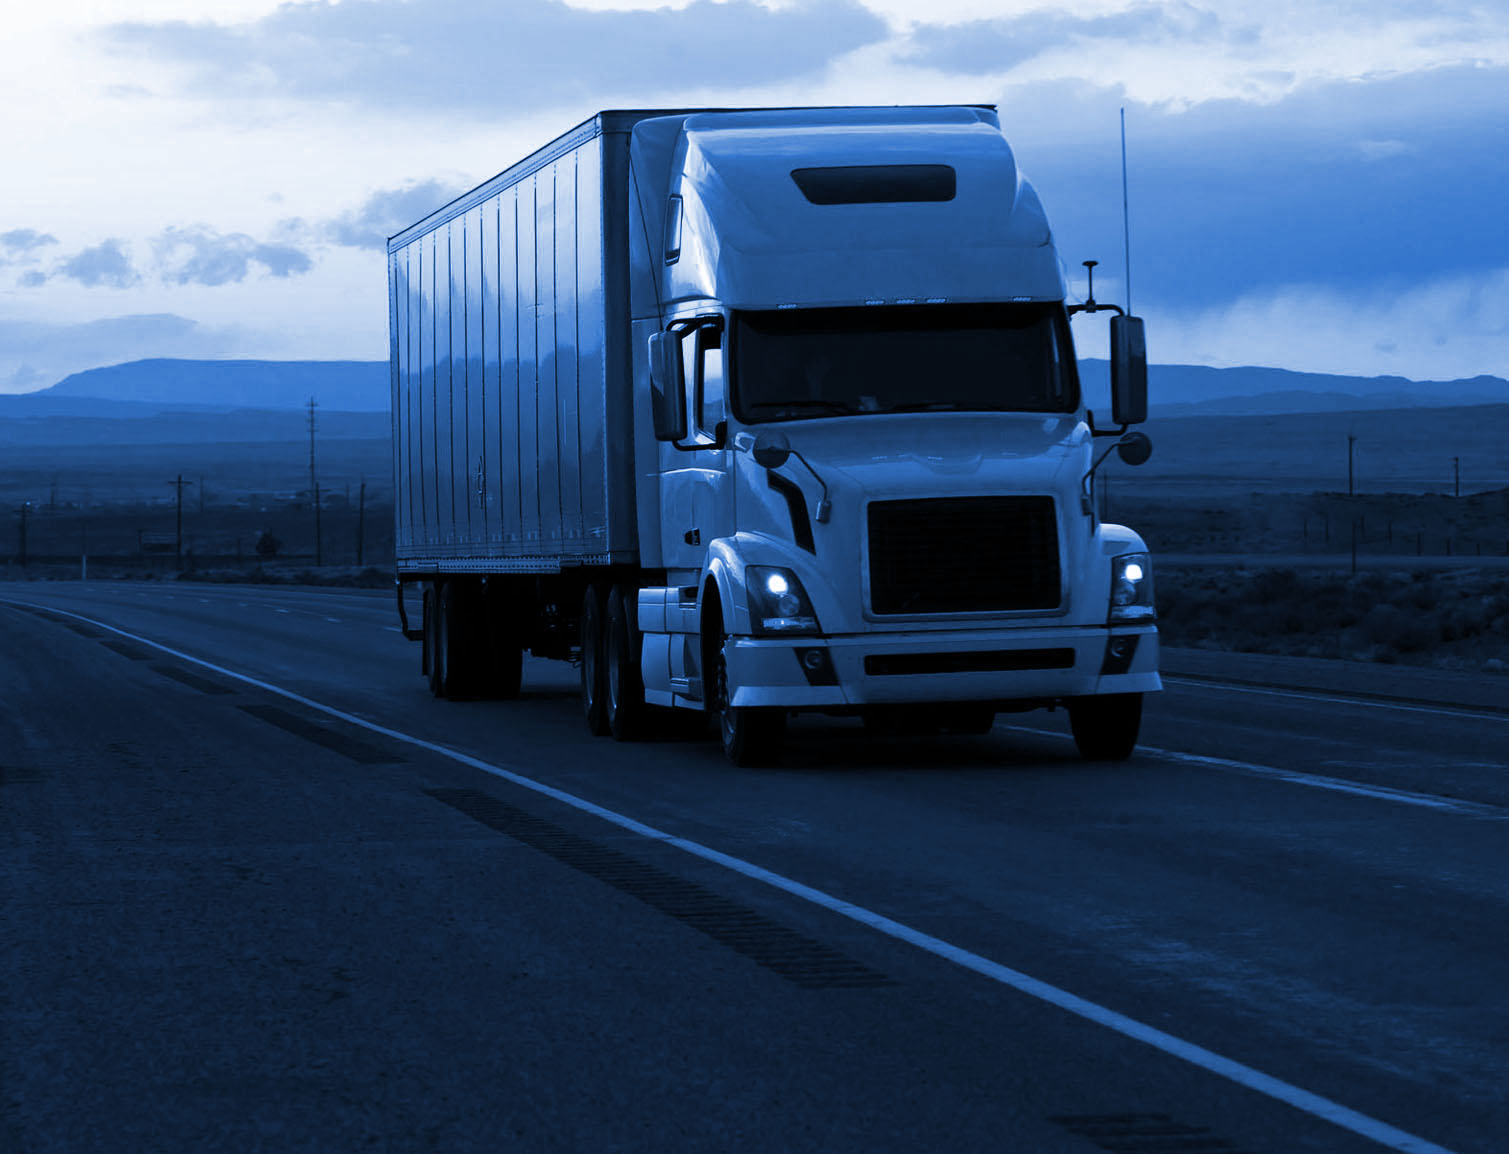 NEED HELP RECRUITING AND RETAINING CDL DRIVERS?